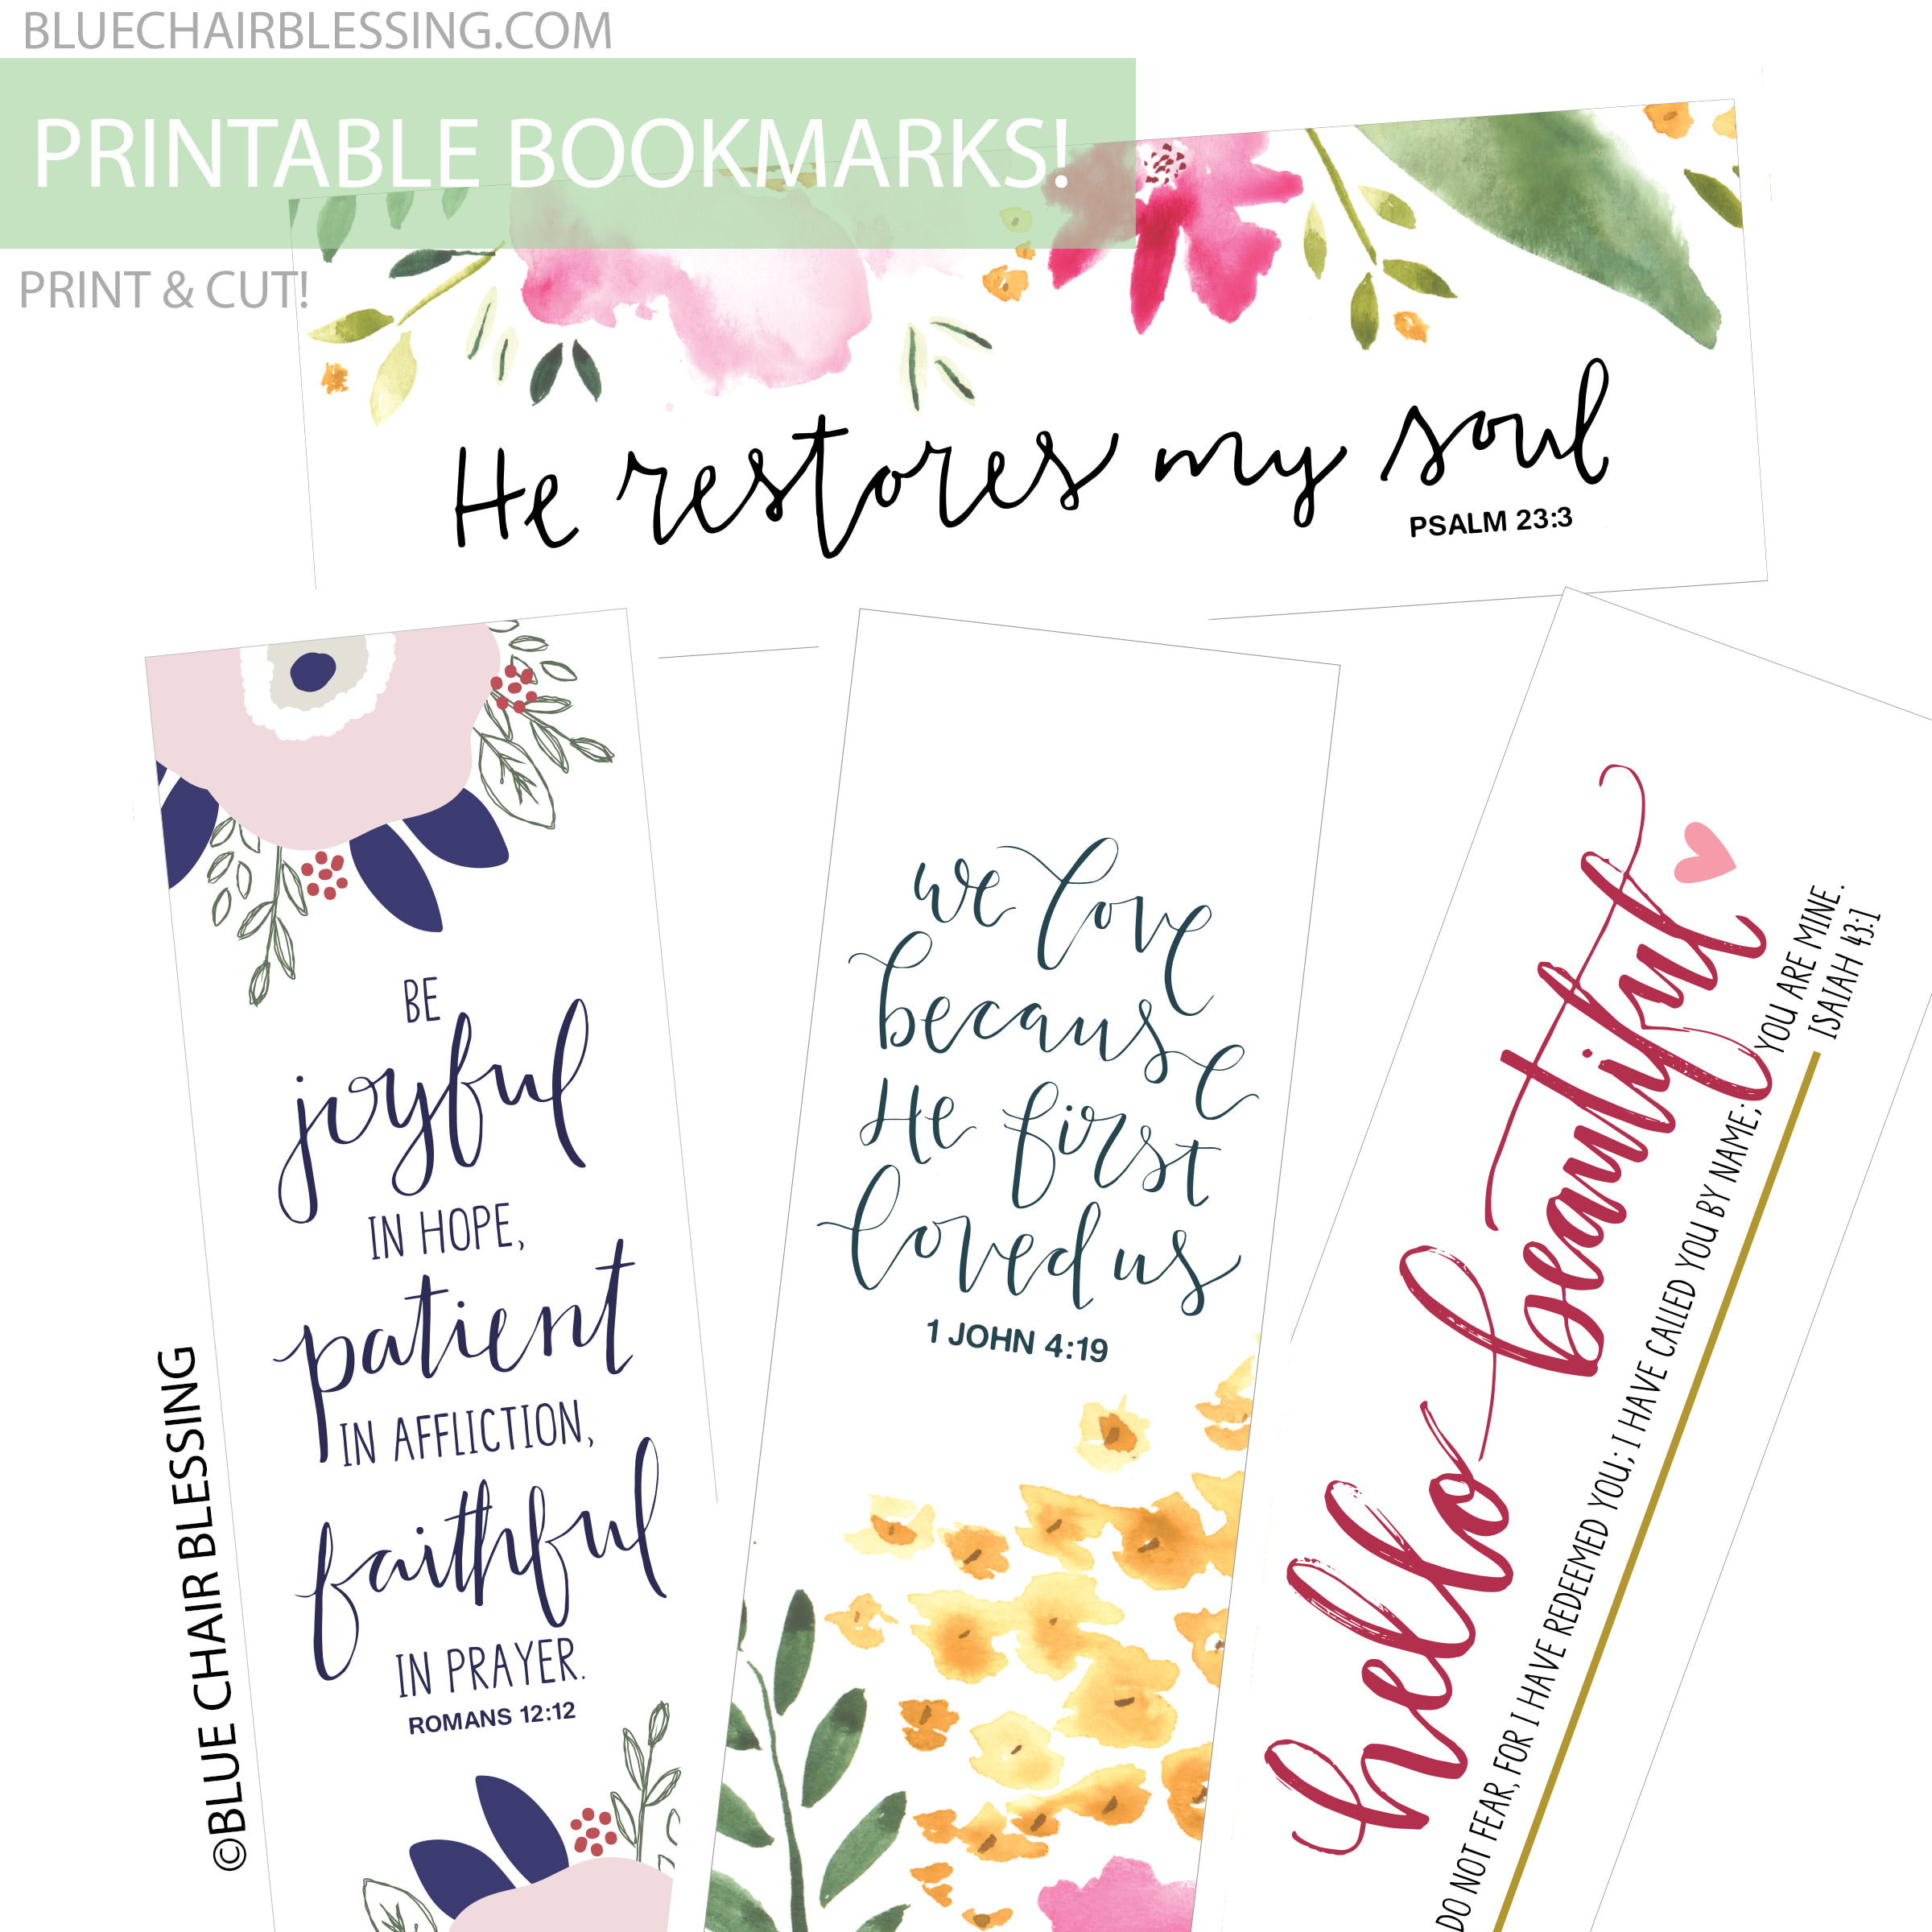 printable bookmarks with scripture set of 4 bookmarks to print and cut on your own